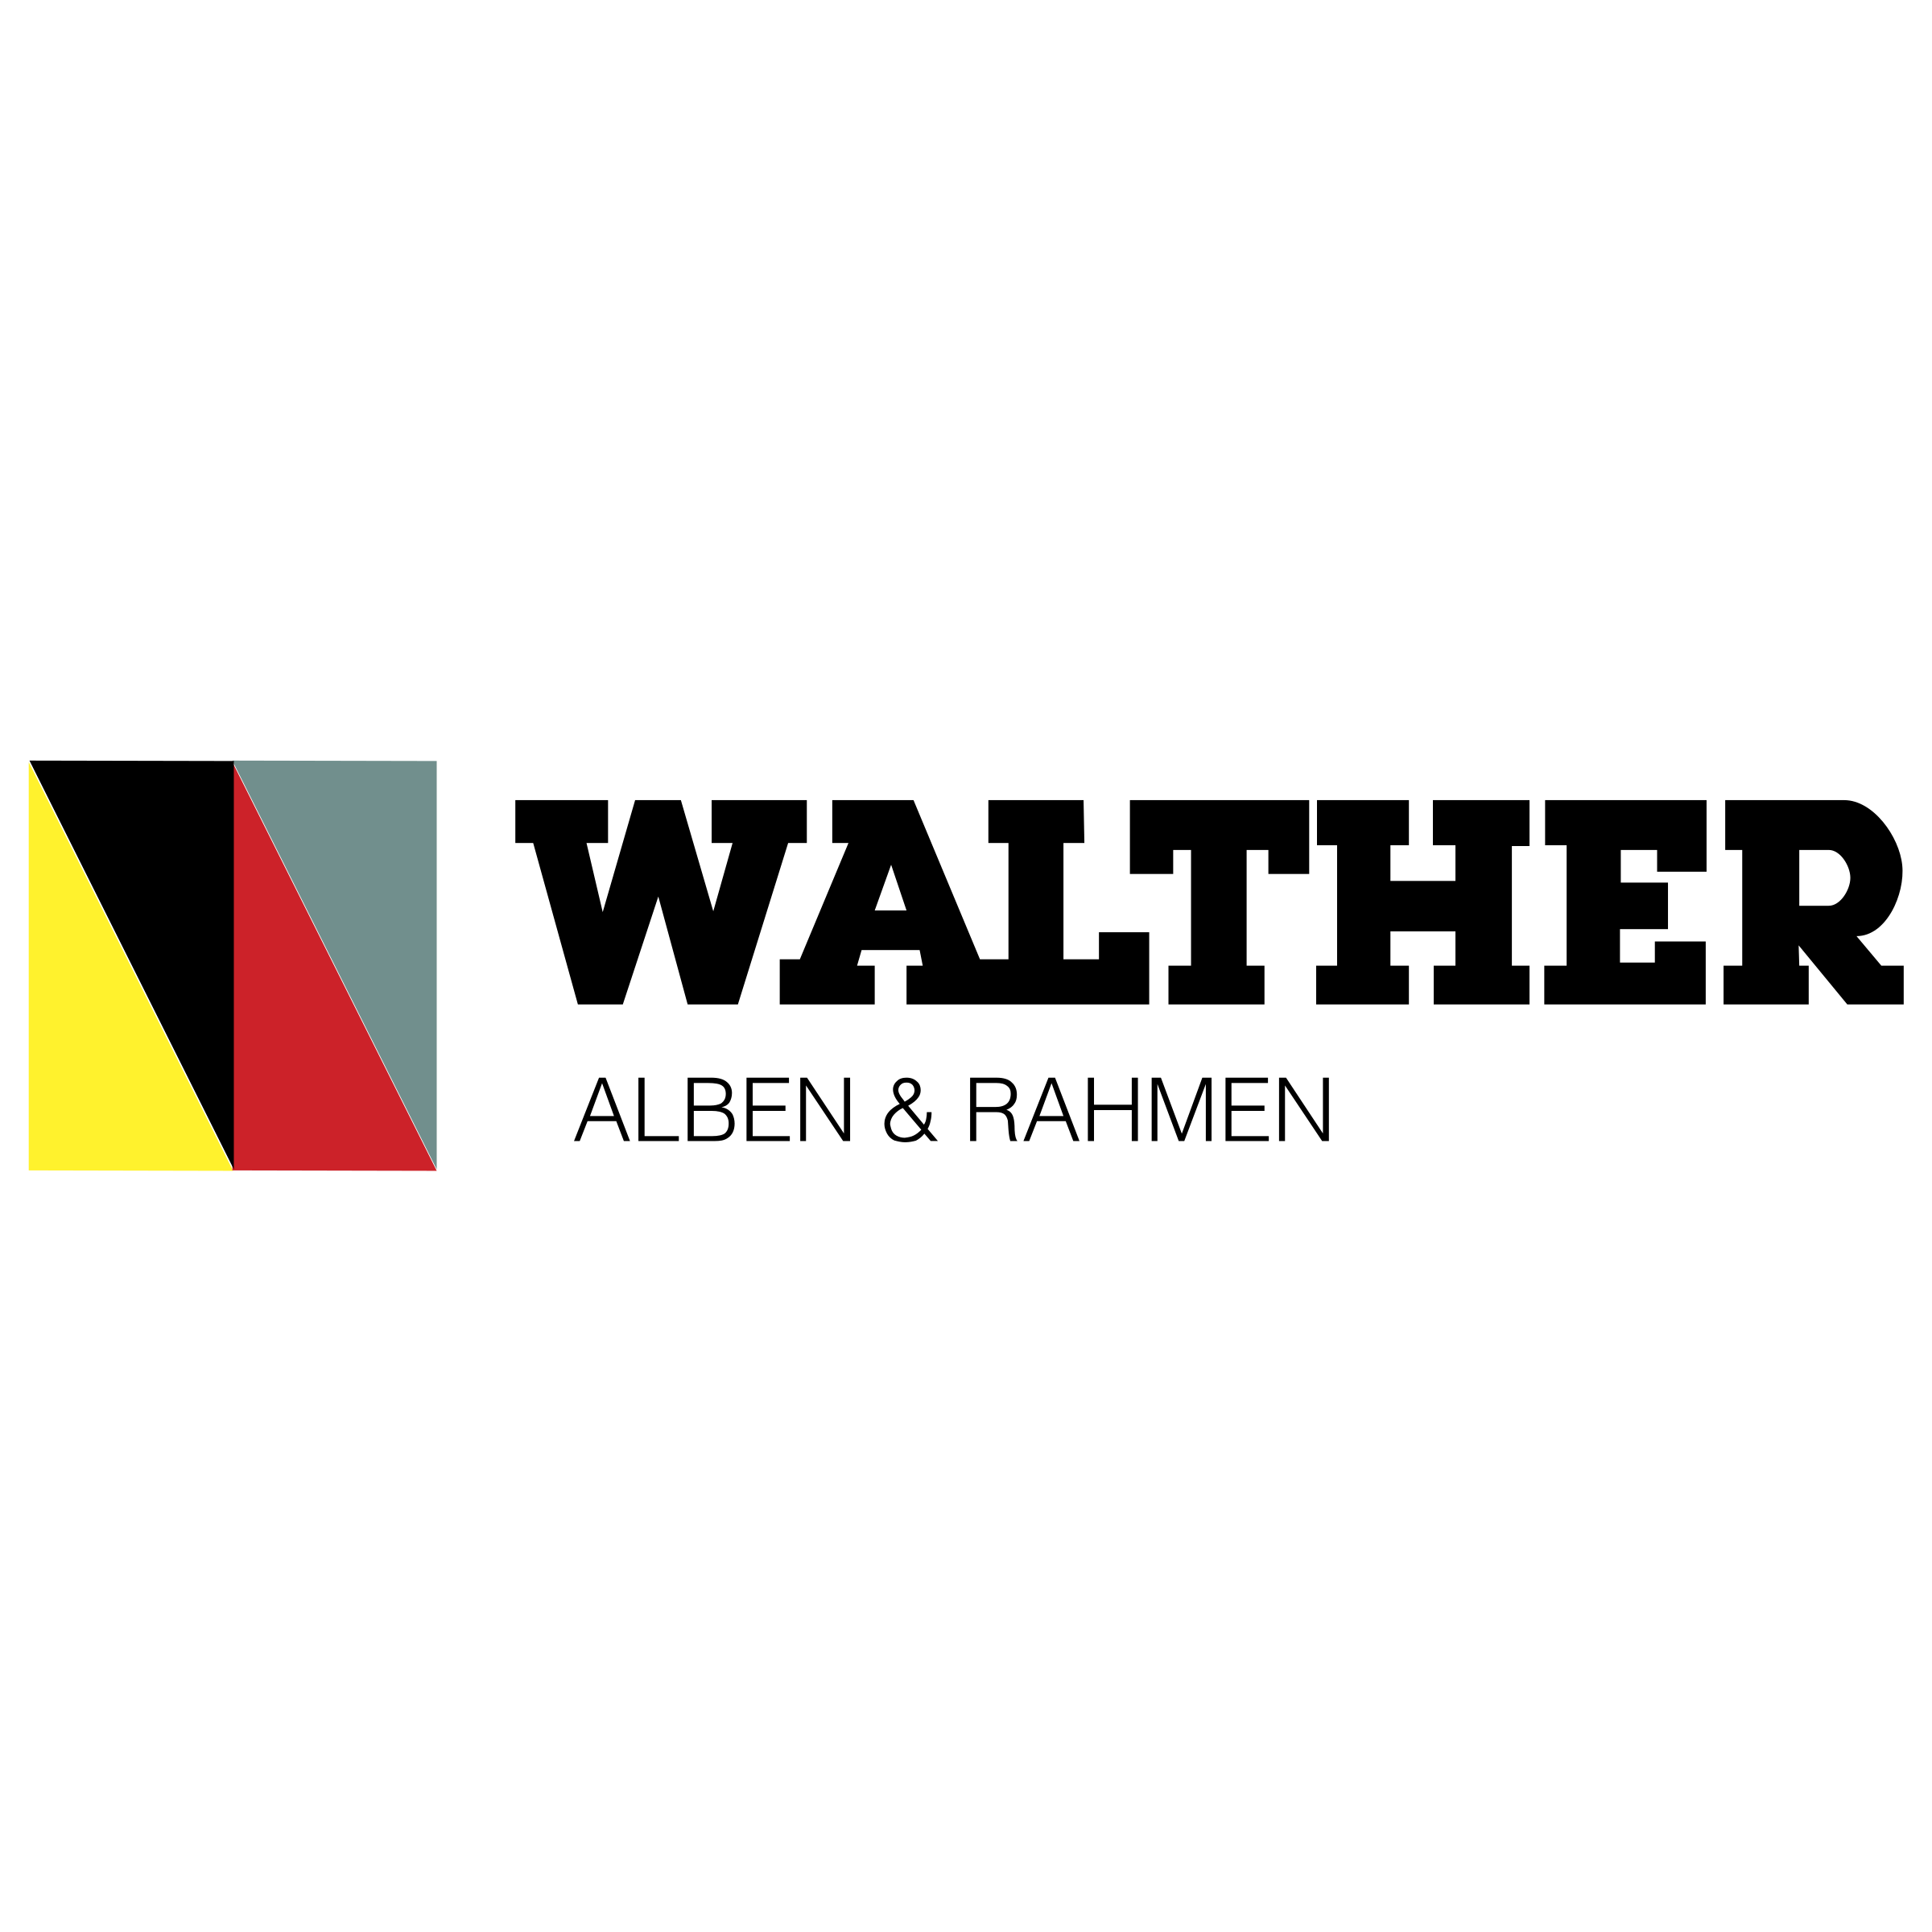 Walther Logo - Walther Logo PNG Transparent & SVG Vector - Freebie Supply